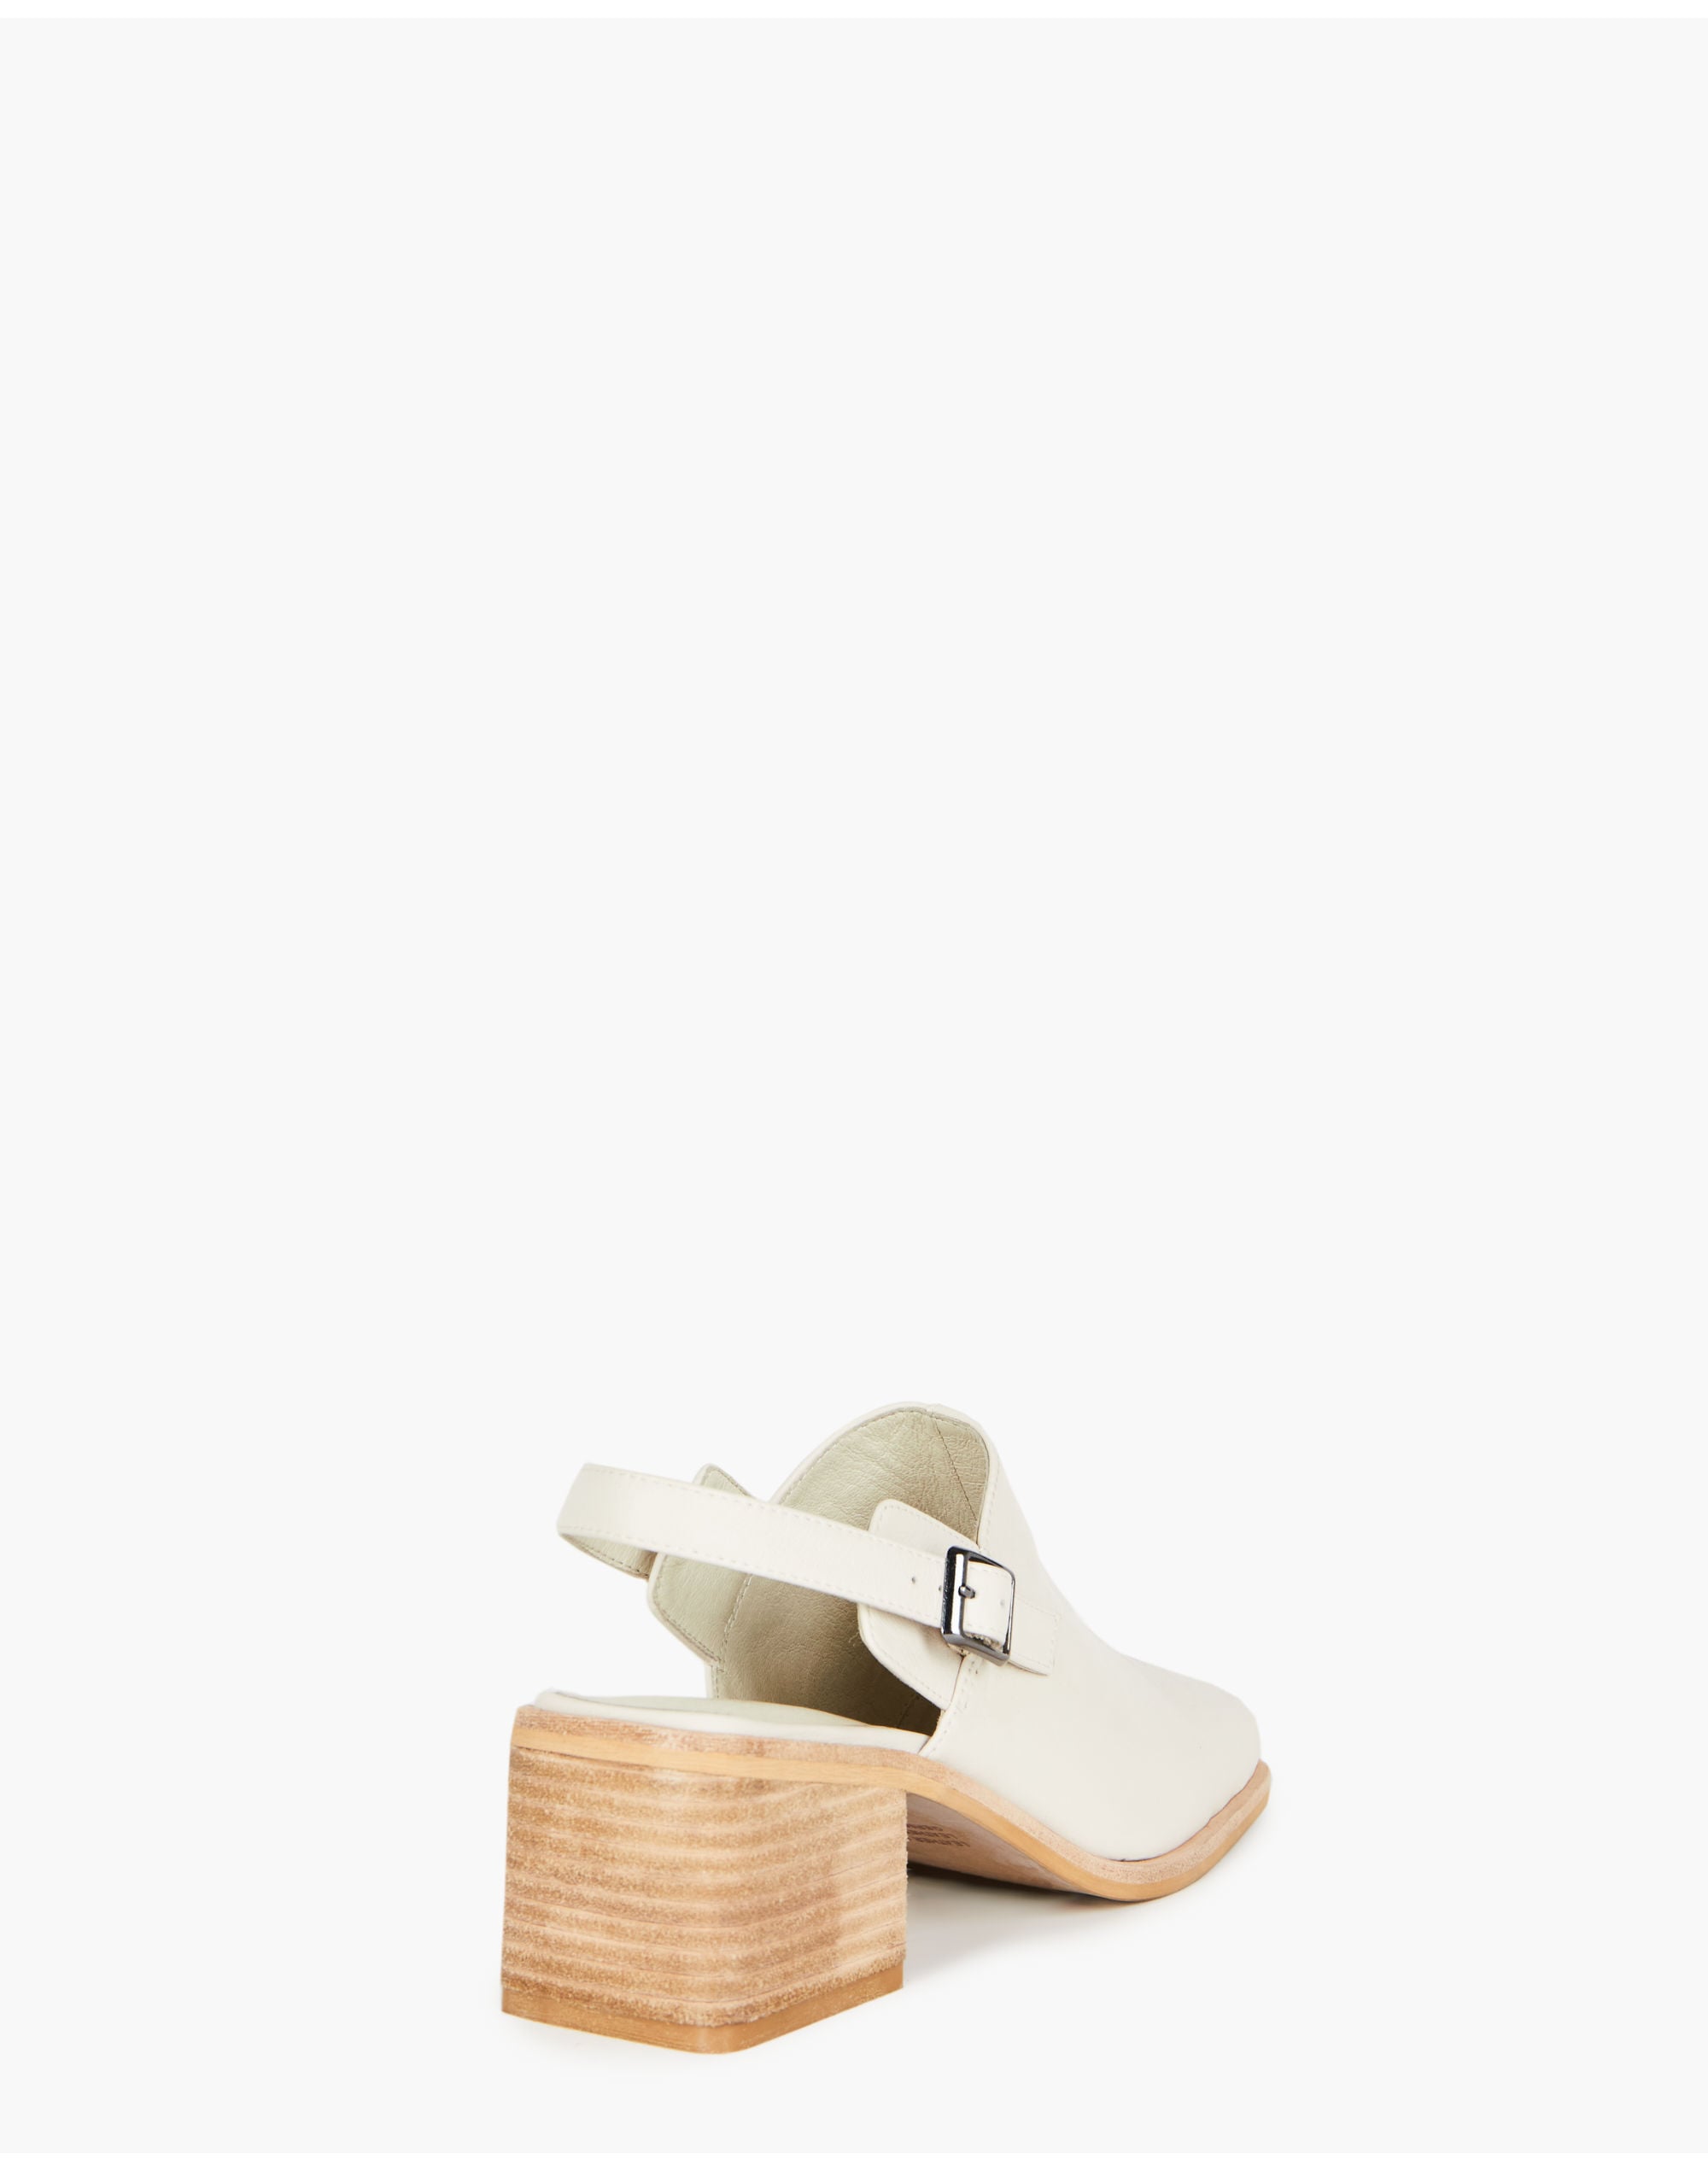 Intentionally Blank Leather Marty 2 Heels